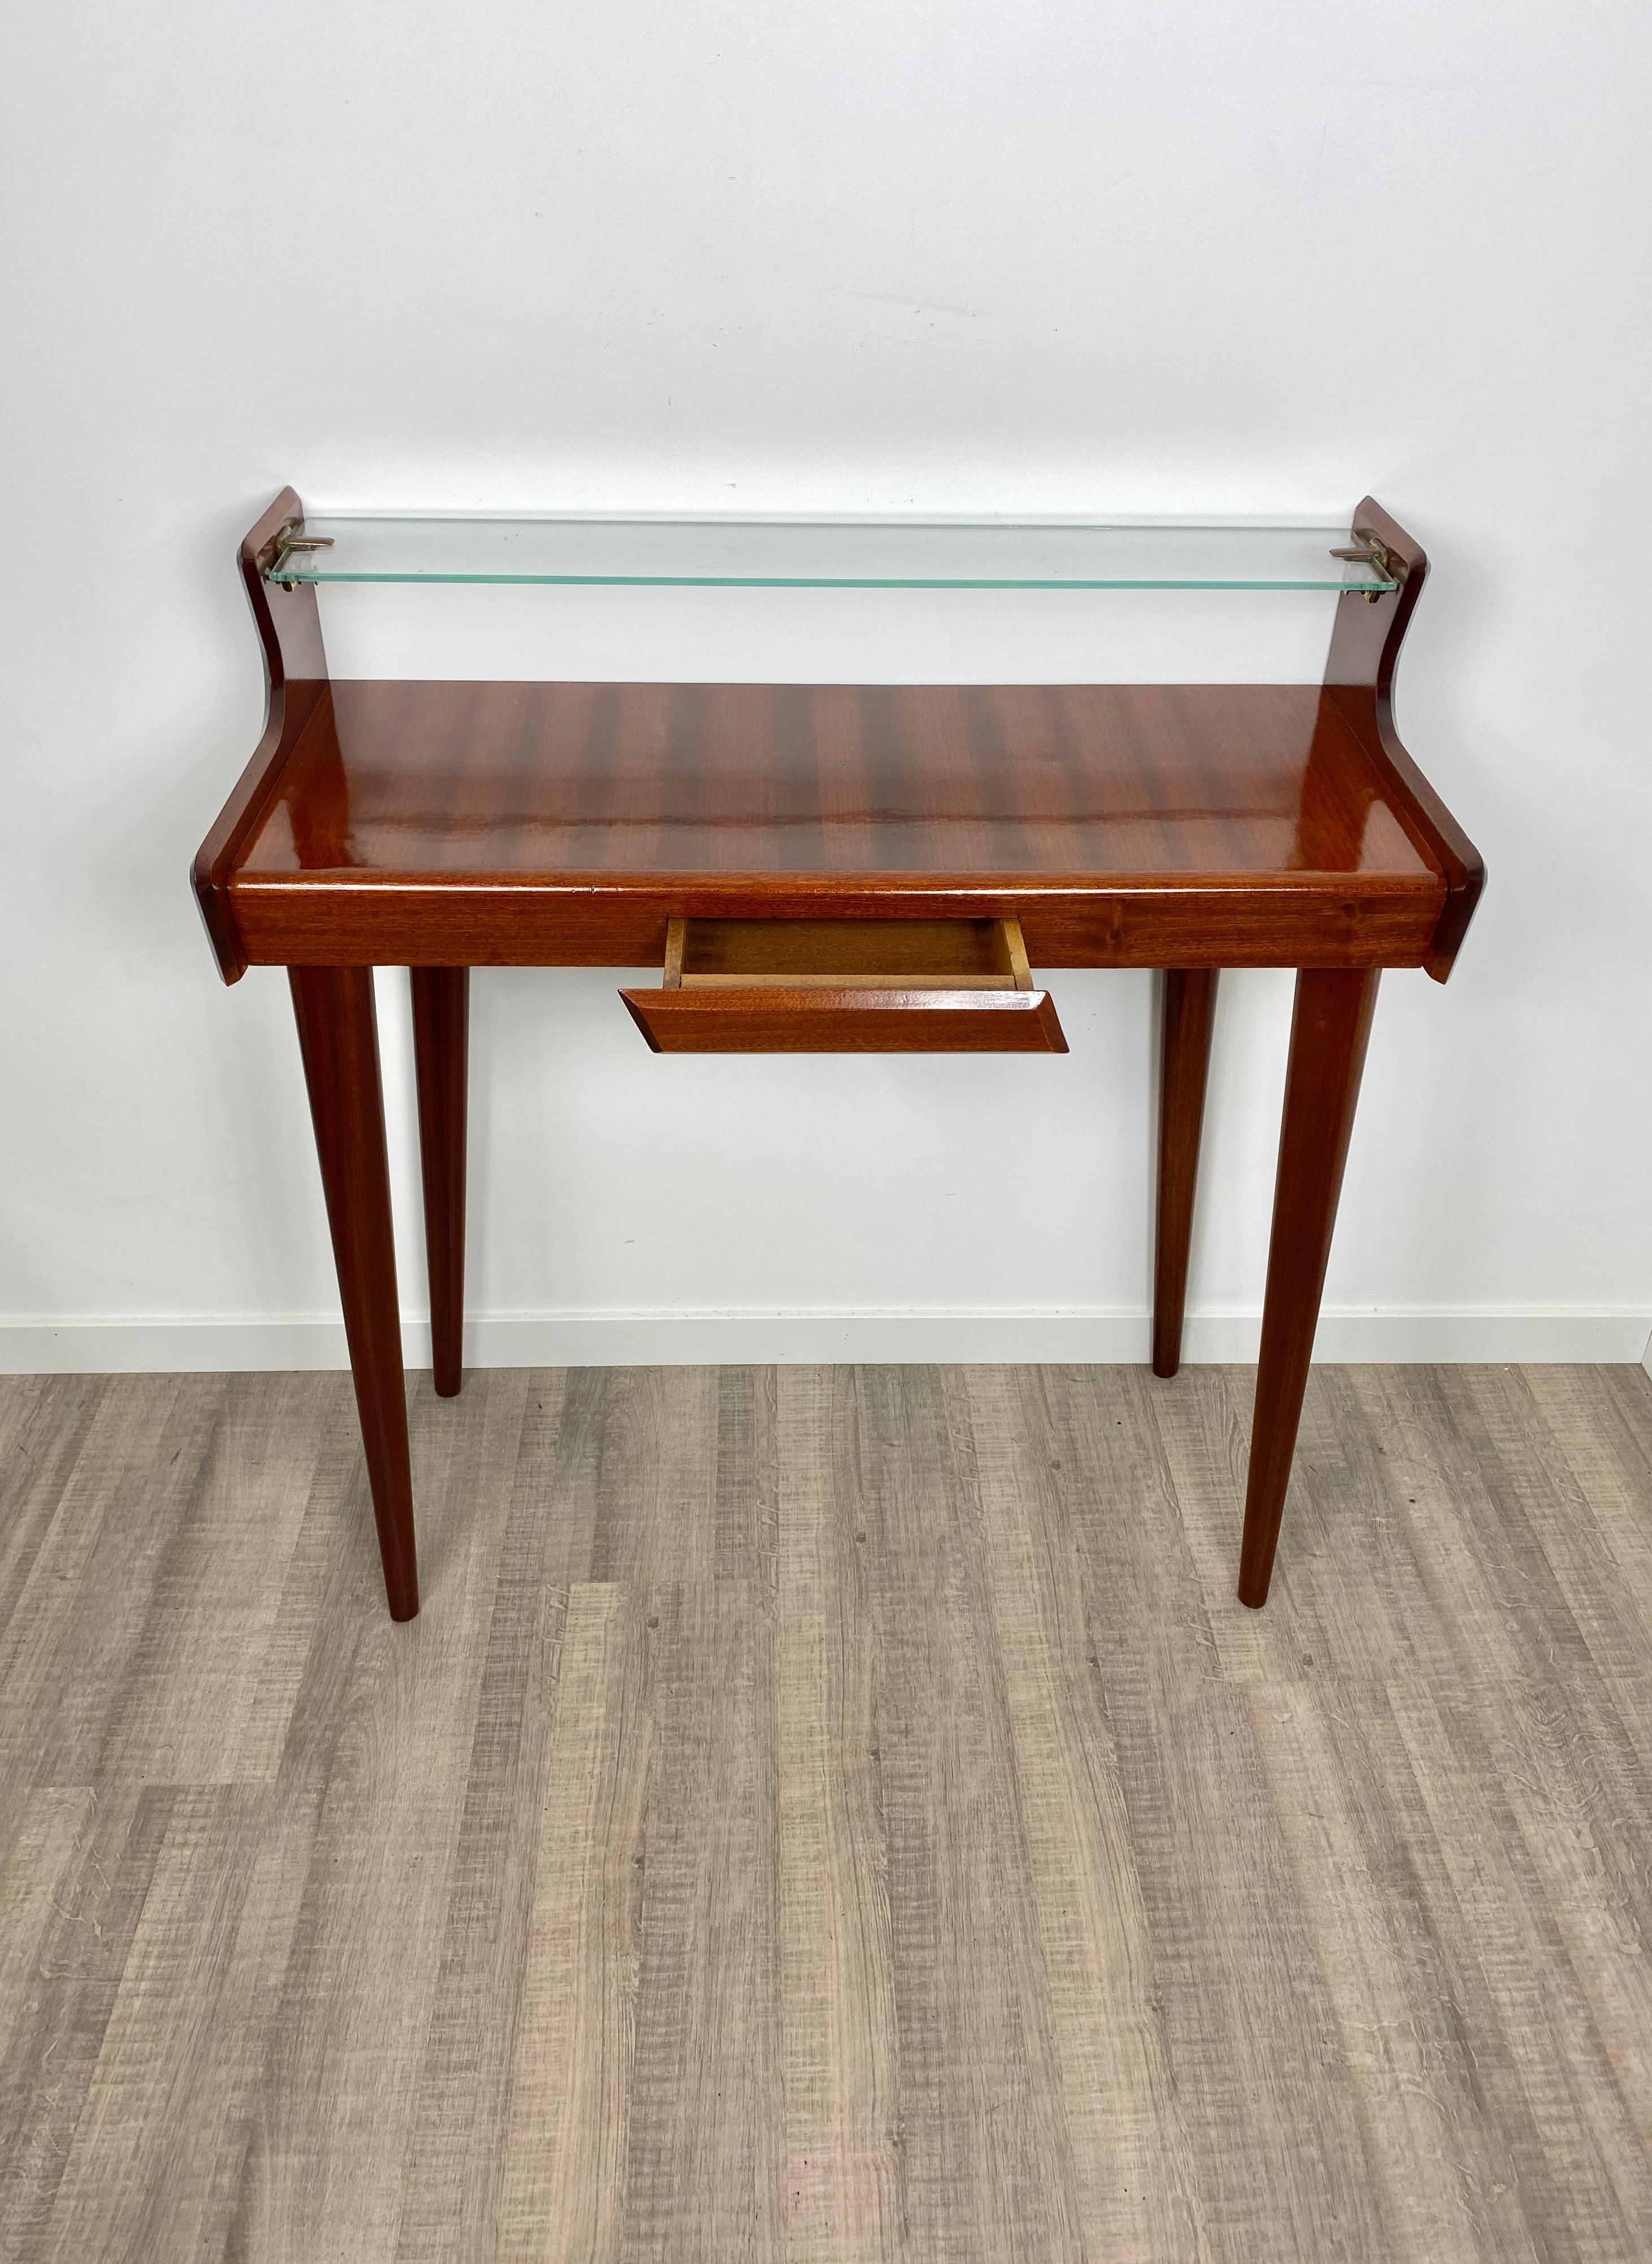 Mid-20th Century Italian Midcentury Mahogany Wood and Glass Console Table by Carlo de Carli 1950s For Sale